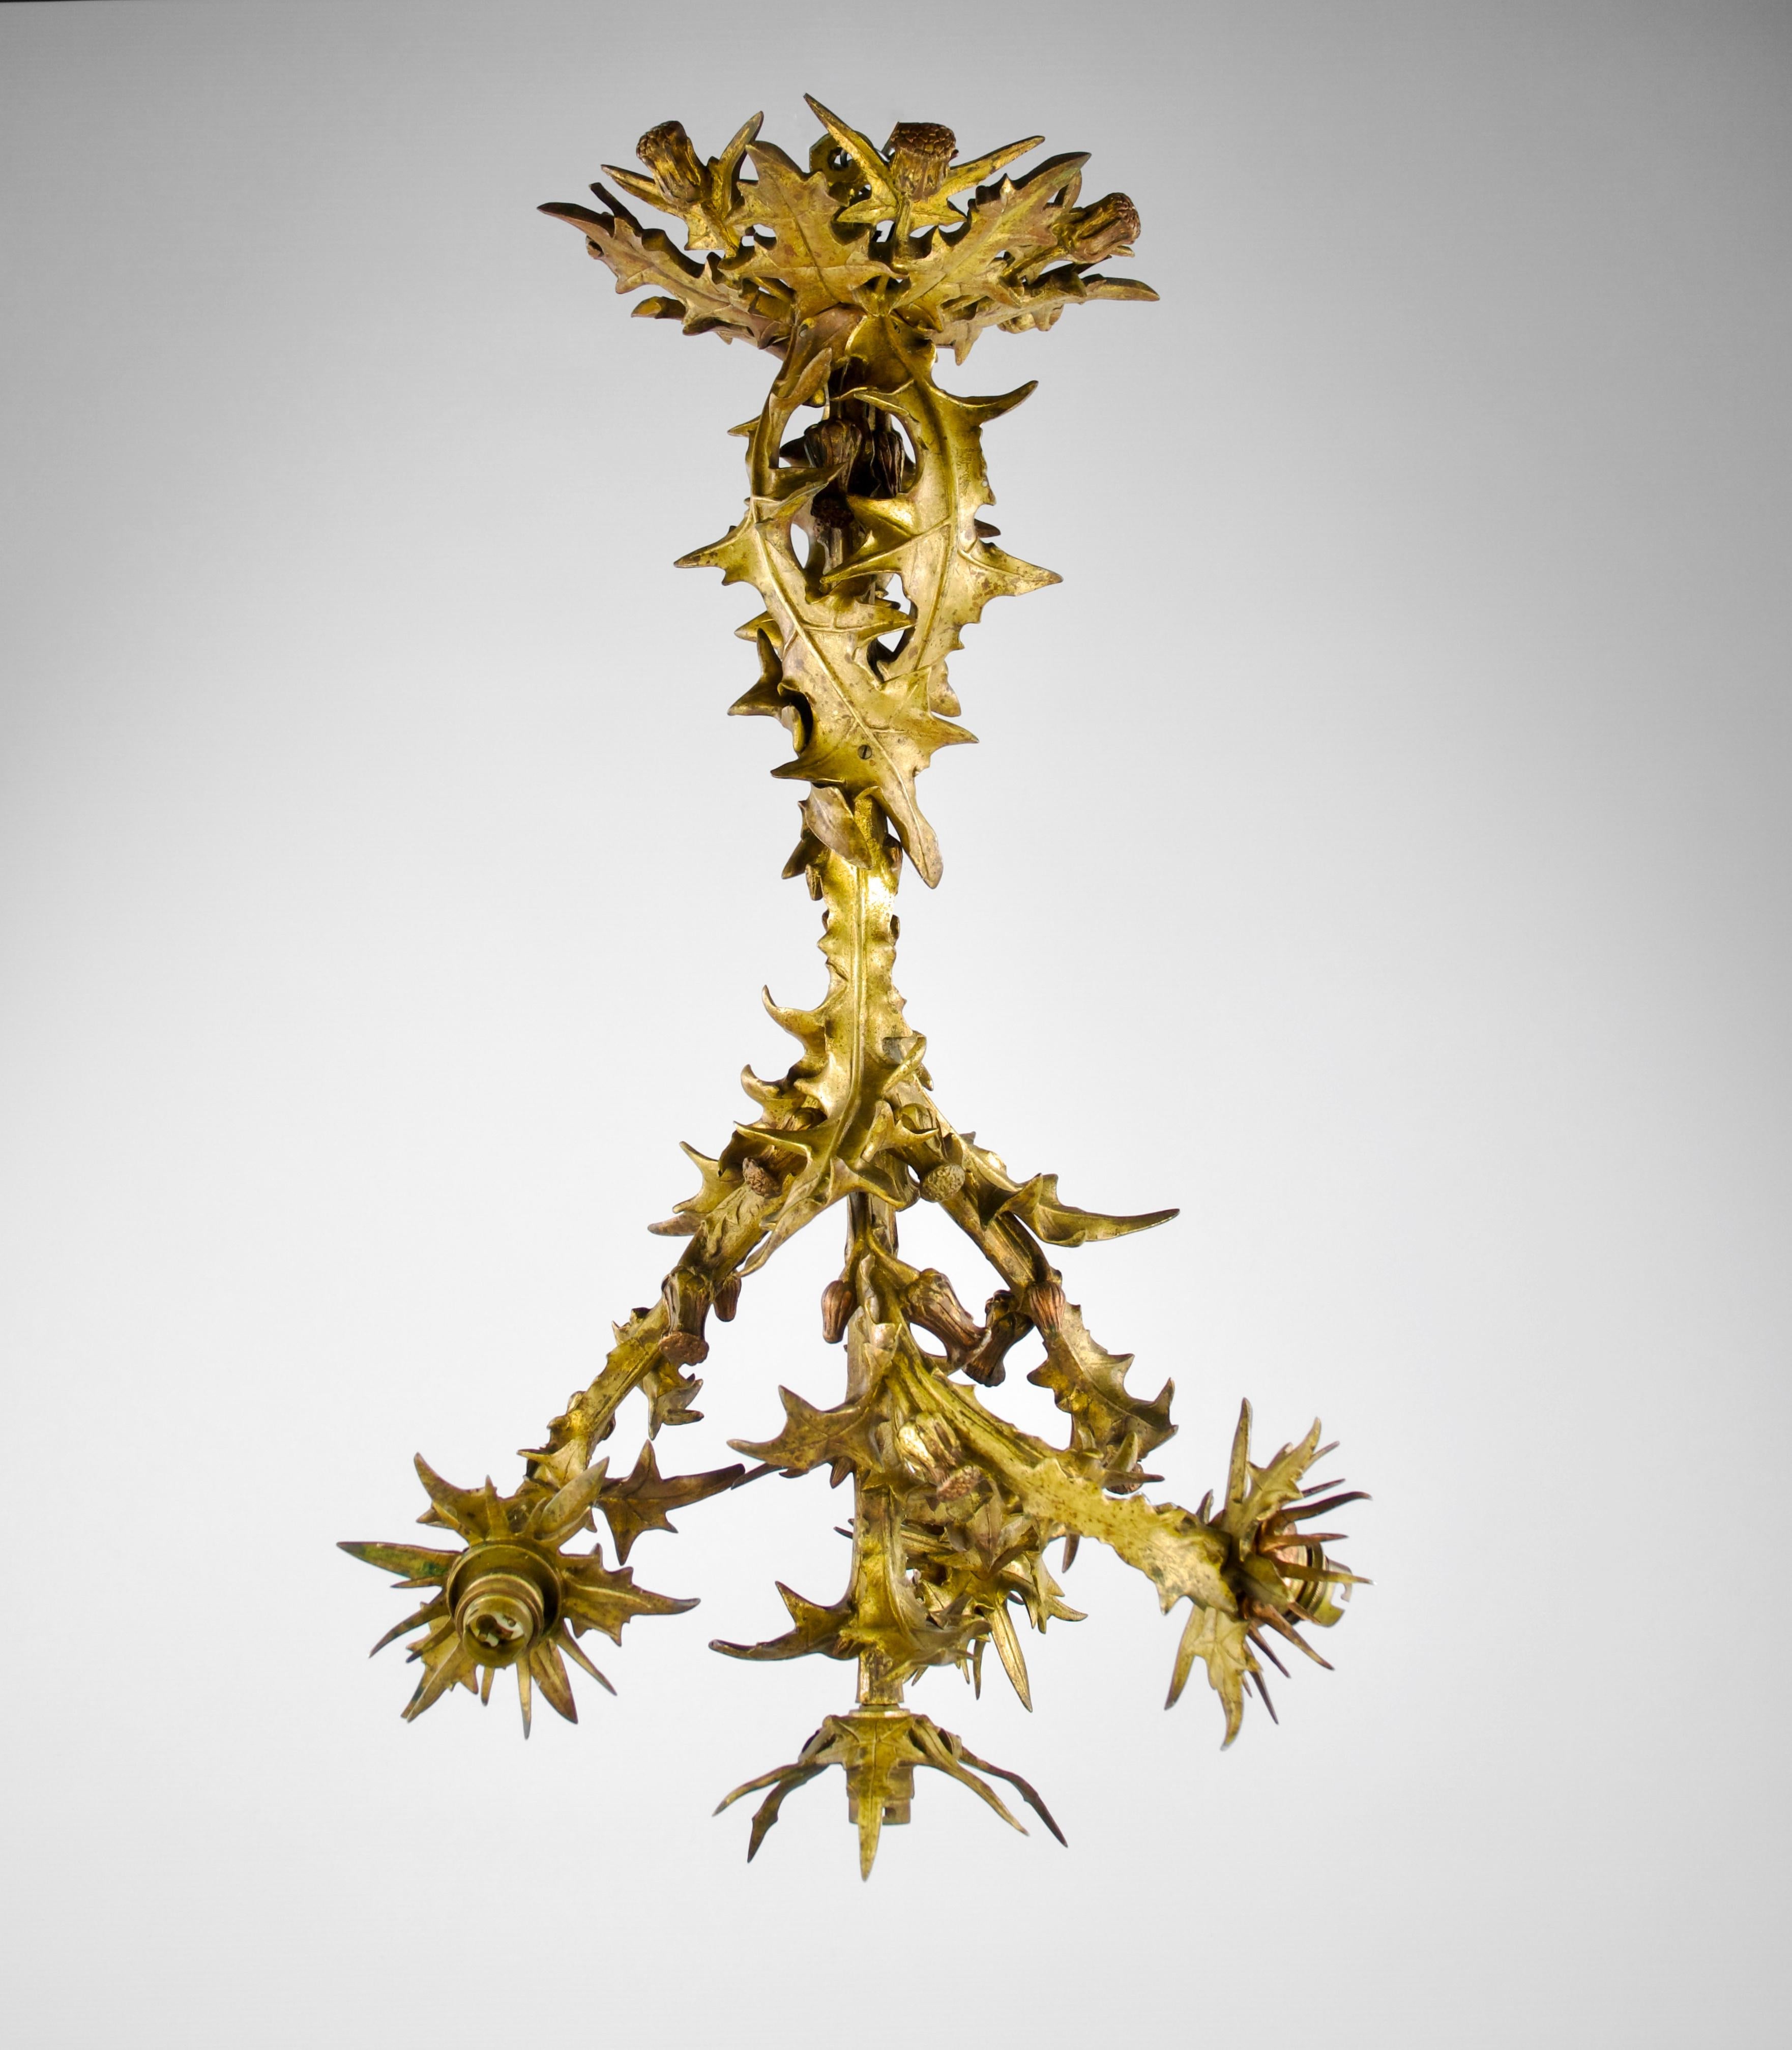 Magnificent gold and orange patina bronze Art Nouveau thistle chandelier by the Emile Colin & Cie manufacture, France circa 1882-1898. Stamp of the manufacture present indicating its period of production.

Very good condition. Natural oxidation seen